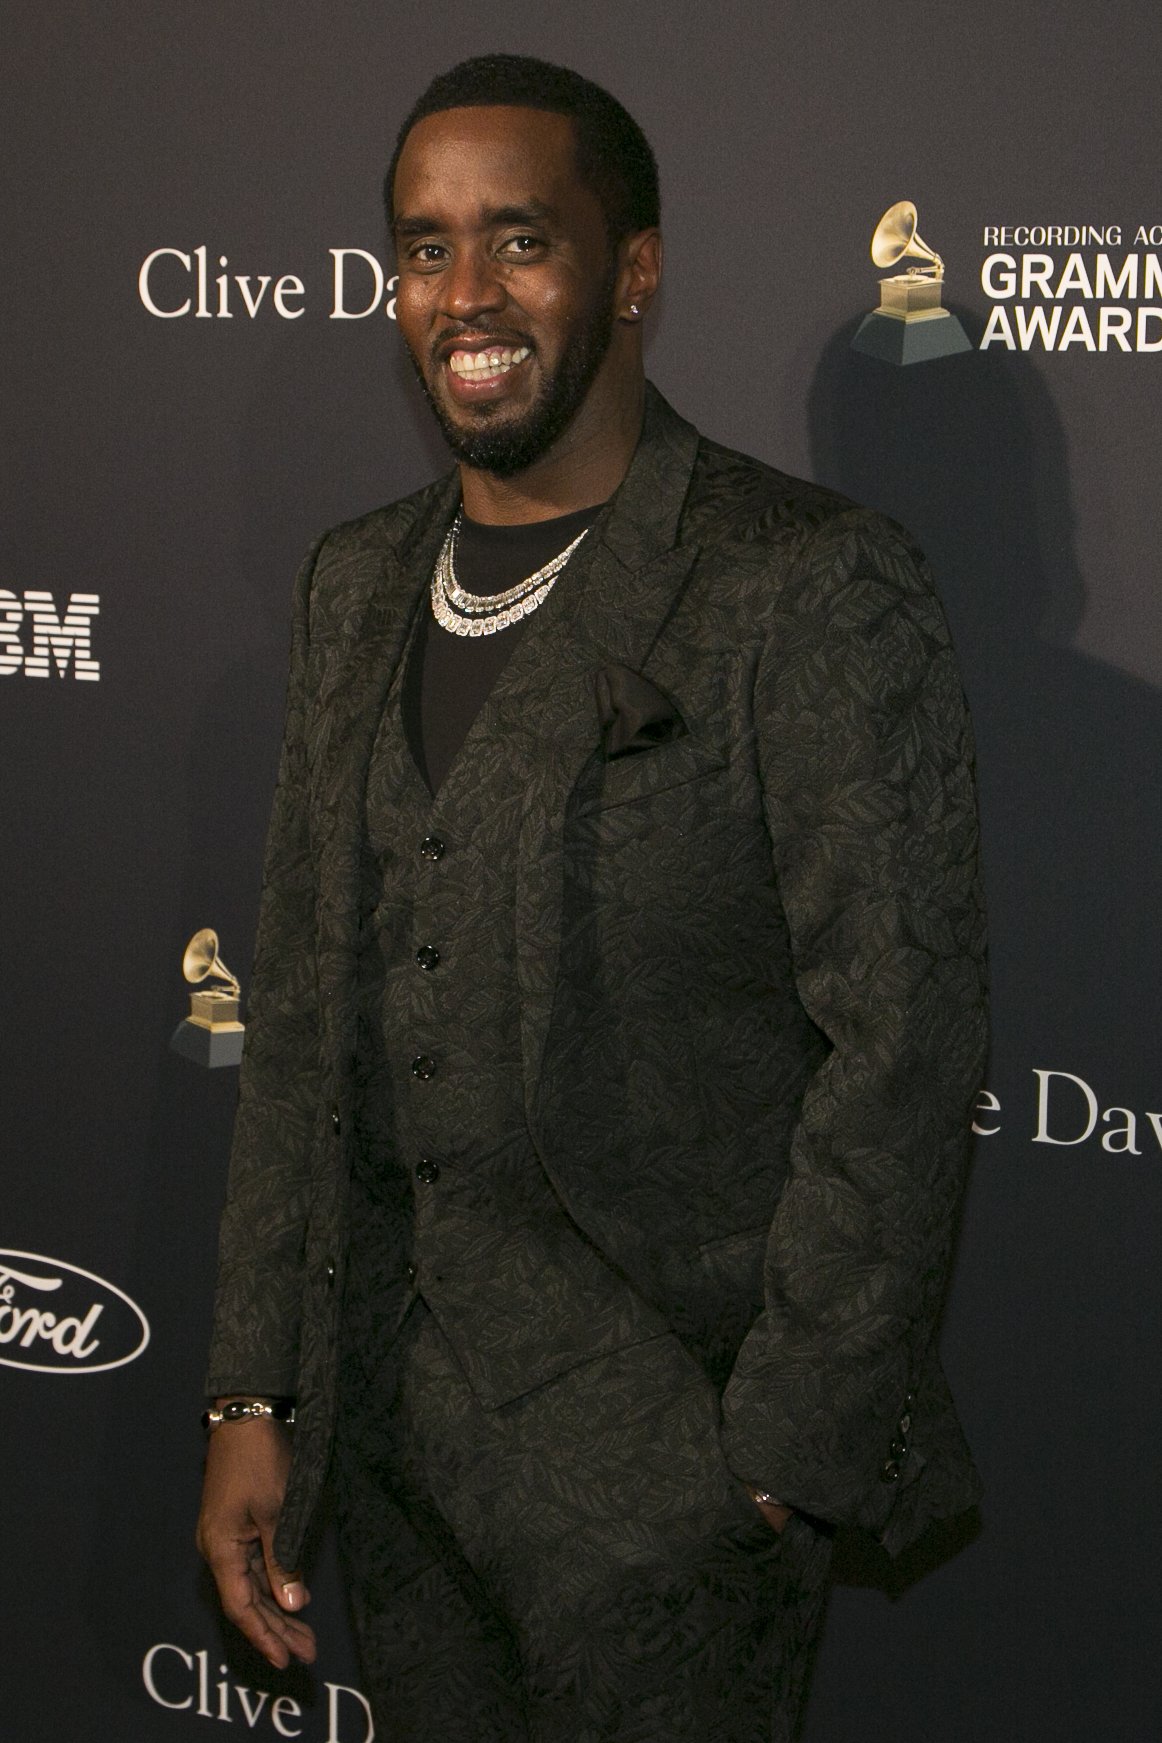 Sean "Diddy" Combs attends the Pre-Grammy Gala and Grammy Salute to Industry Icons Honoring Sean "Diddy" Combs at The Beverly Hilton Hotel on January 25, 2020 in Beverly Hills, California | Photo: Getty Images